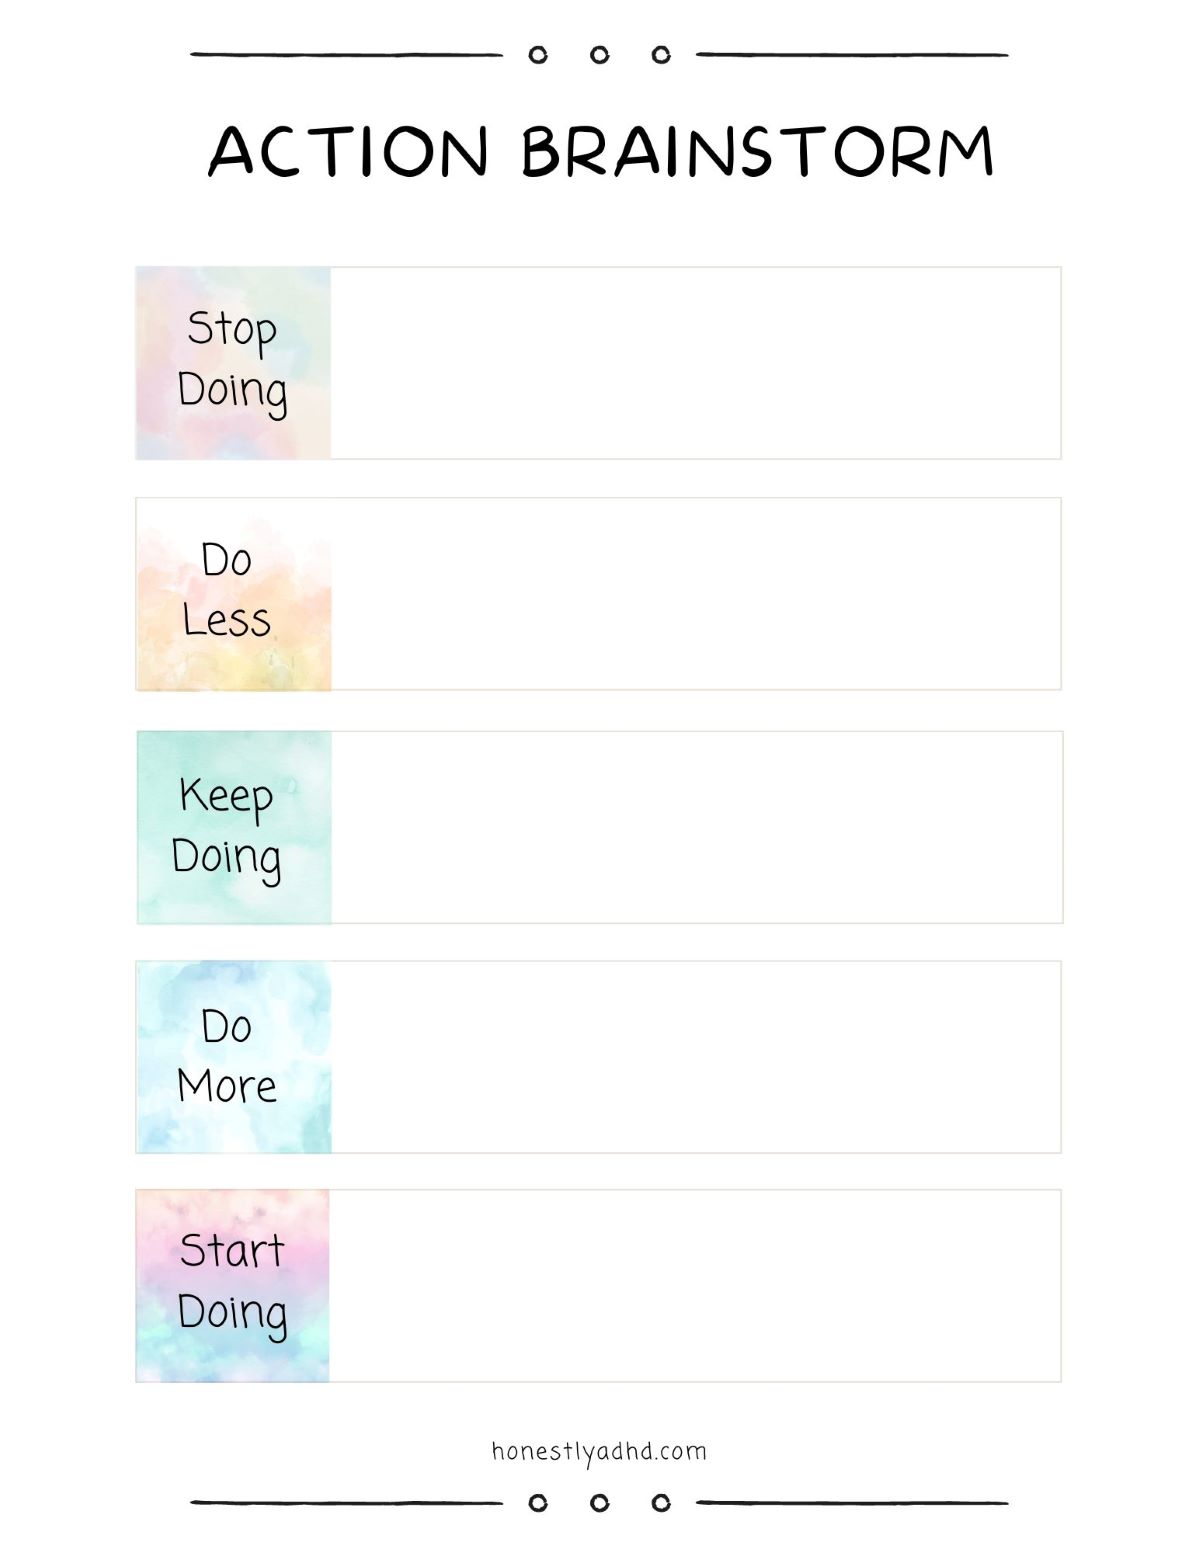 A printable ADHD brainstorm worksheet to help people with ADHD decide what should go on their to-do list.